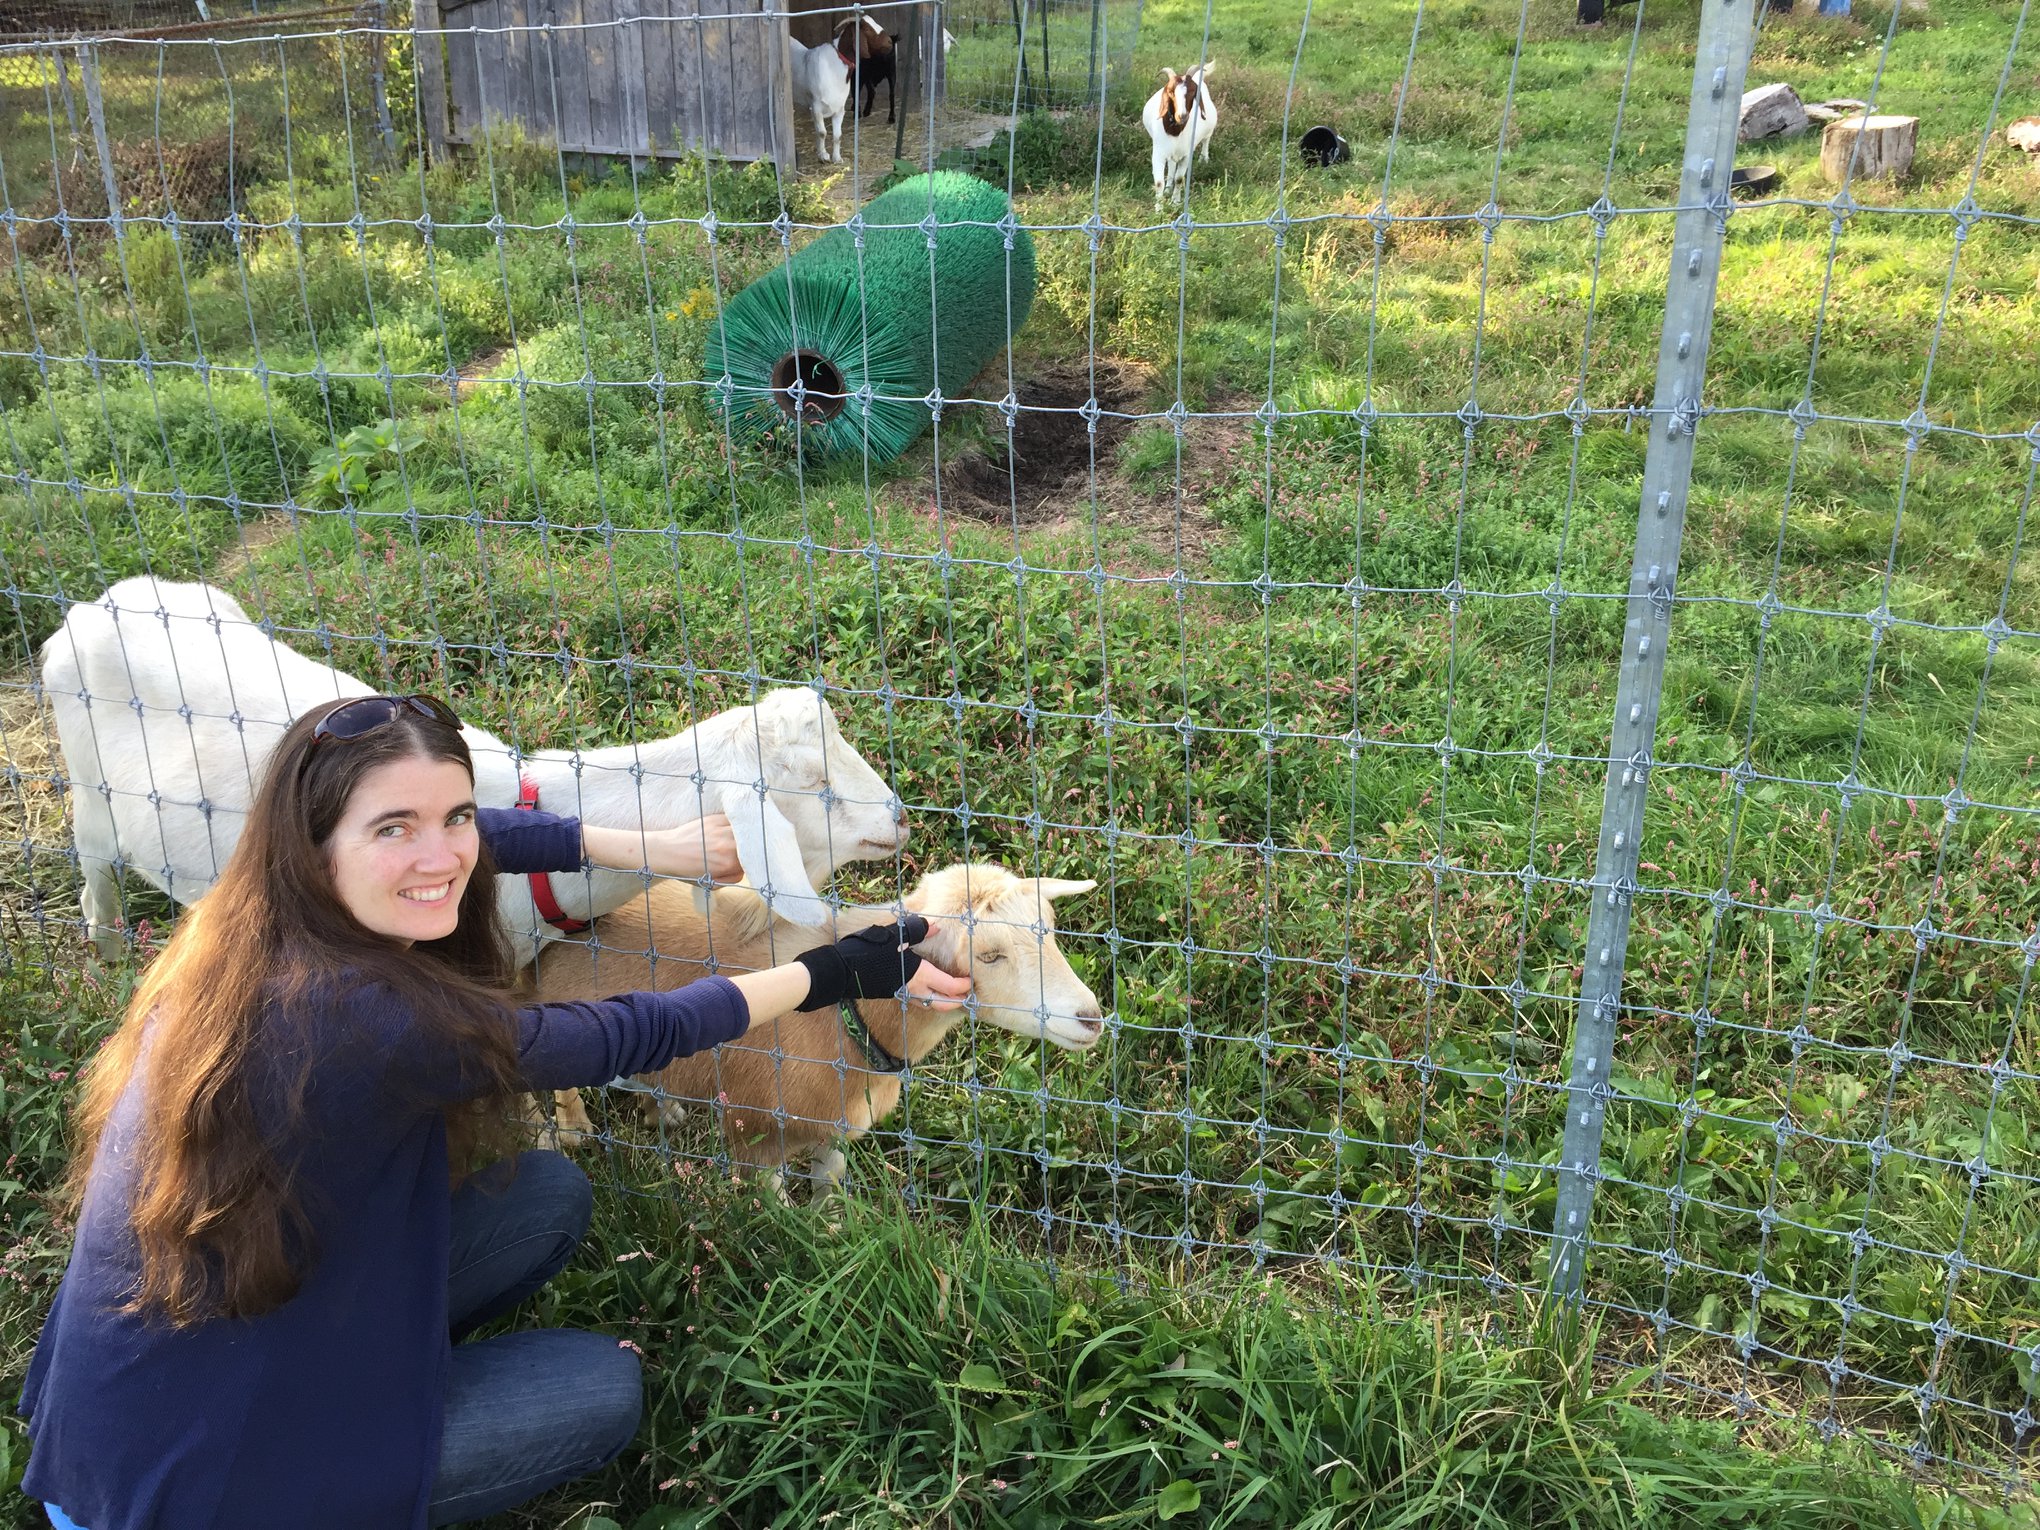 Author Laura Kiesel with goats